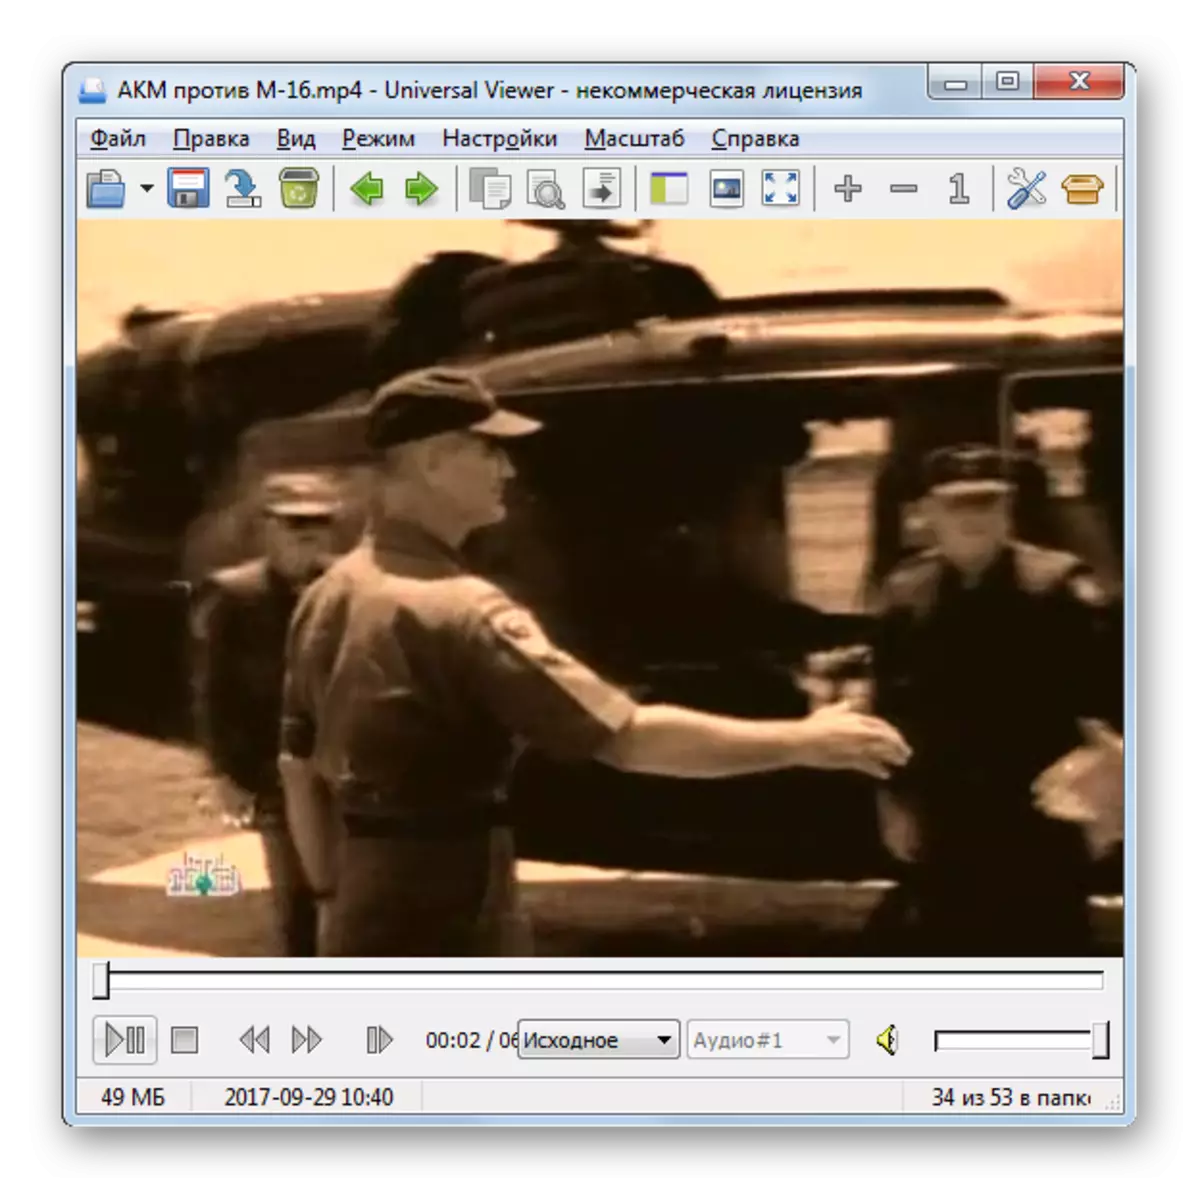 Playing the MP4 video file in Universal Viewer